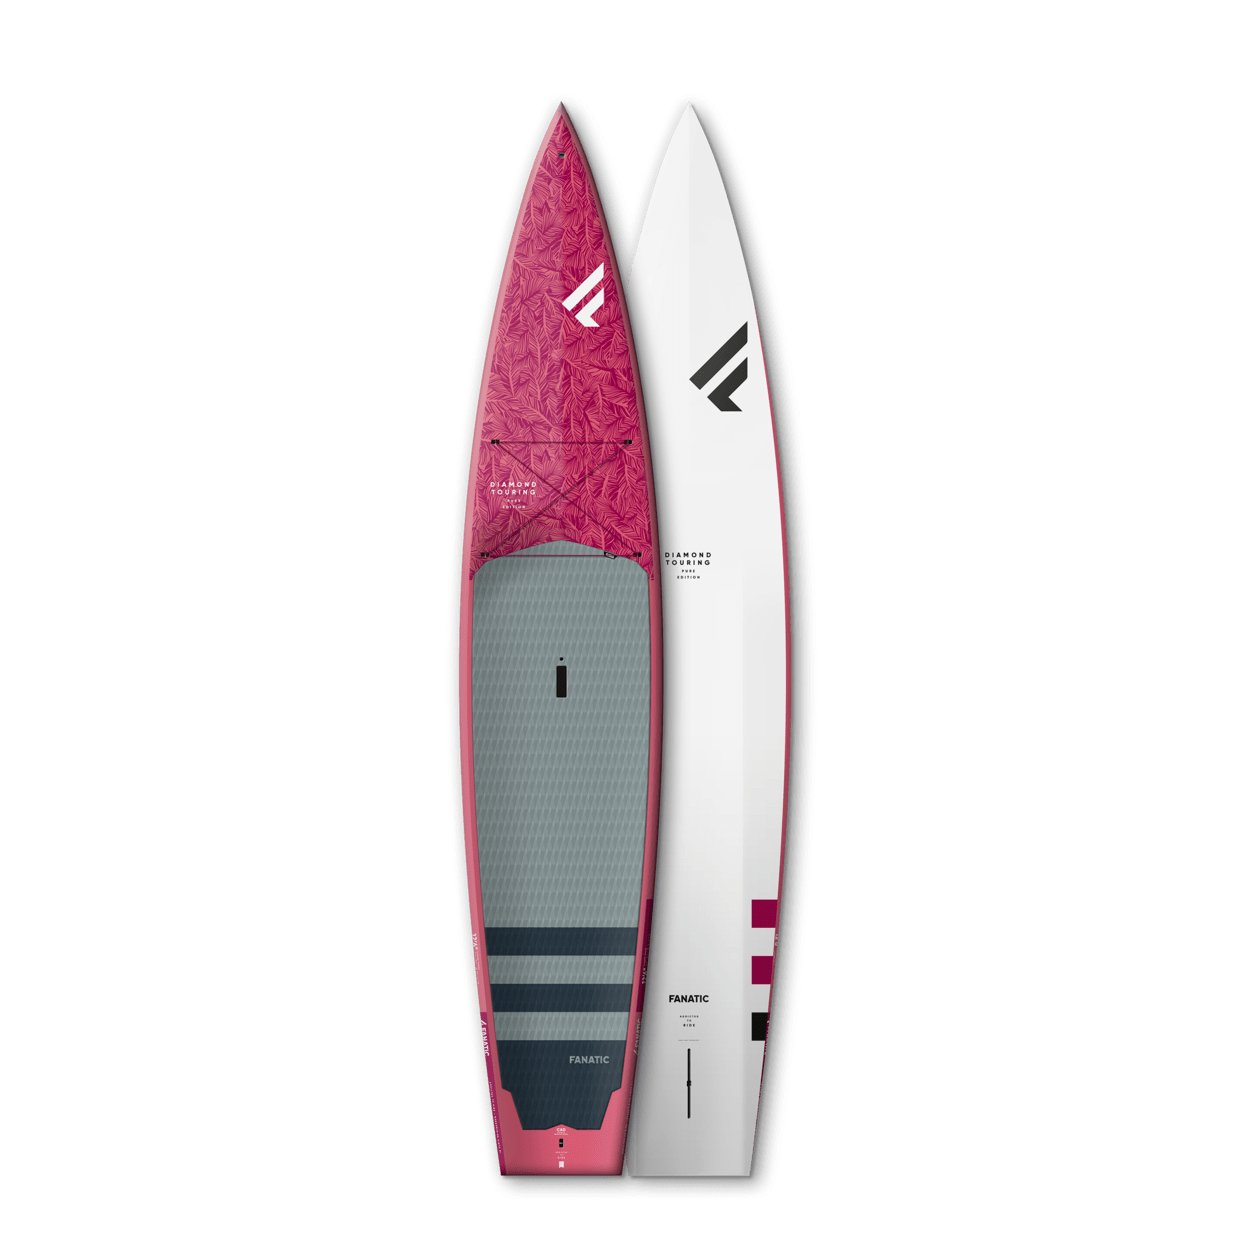 Fanatic Diamond Touring 2022 - Worthing Watersports - 9008415919796 - SUP Composite - Fanatic SUP